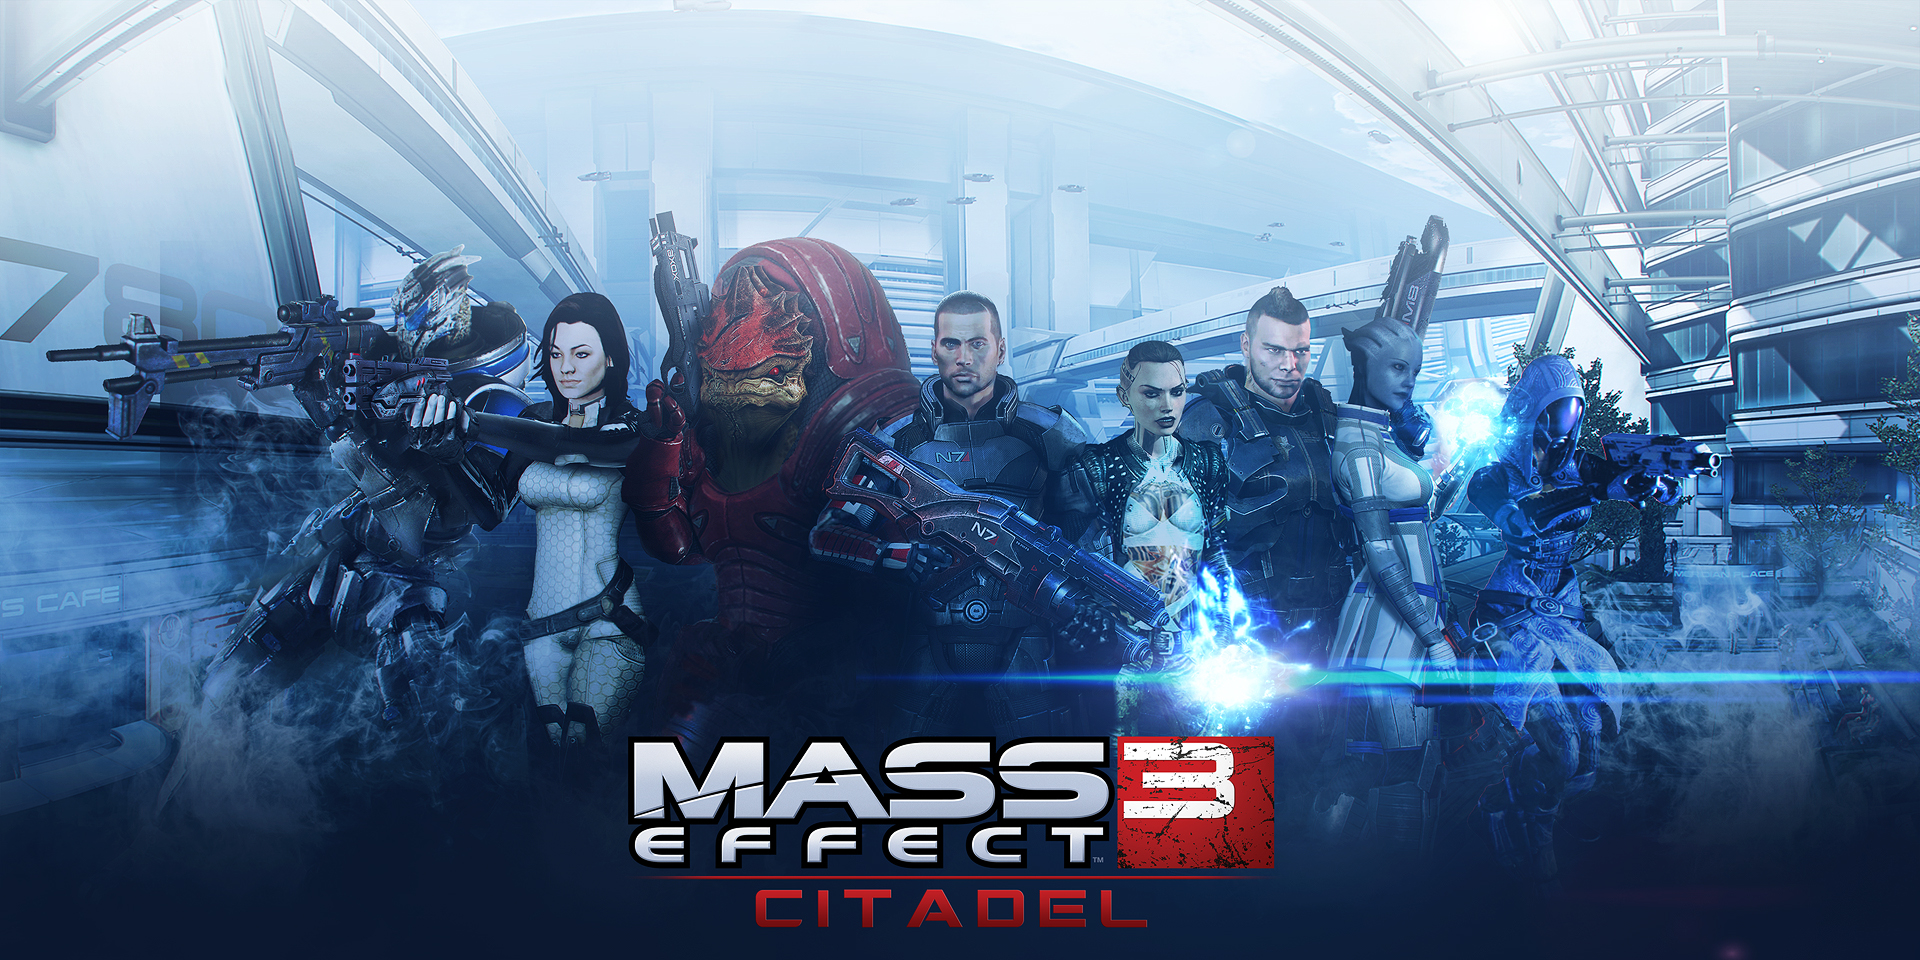 download mass effect 2 citadel for free